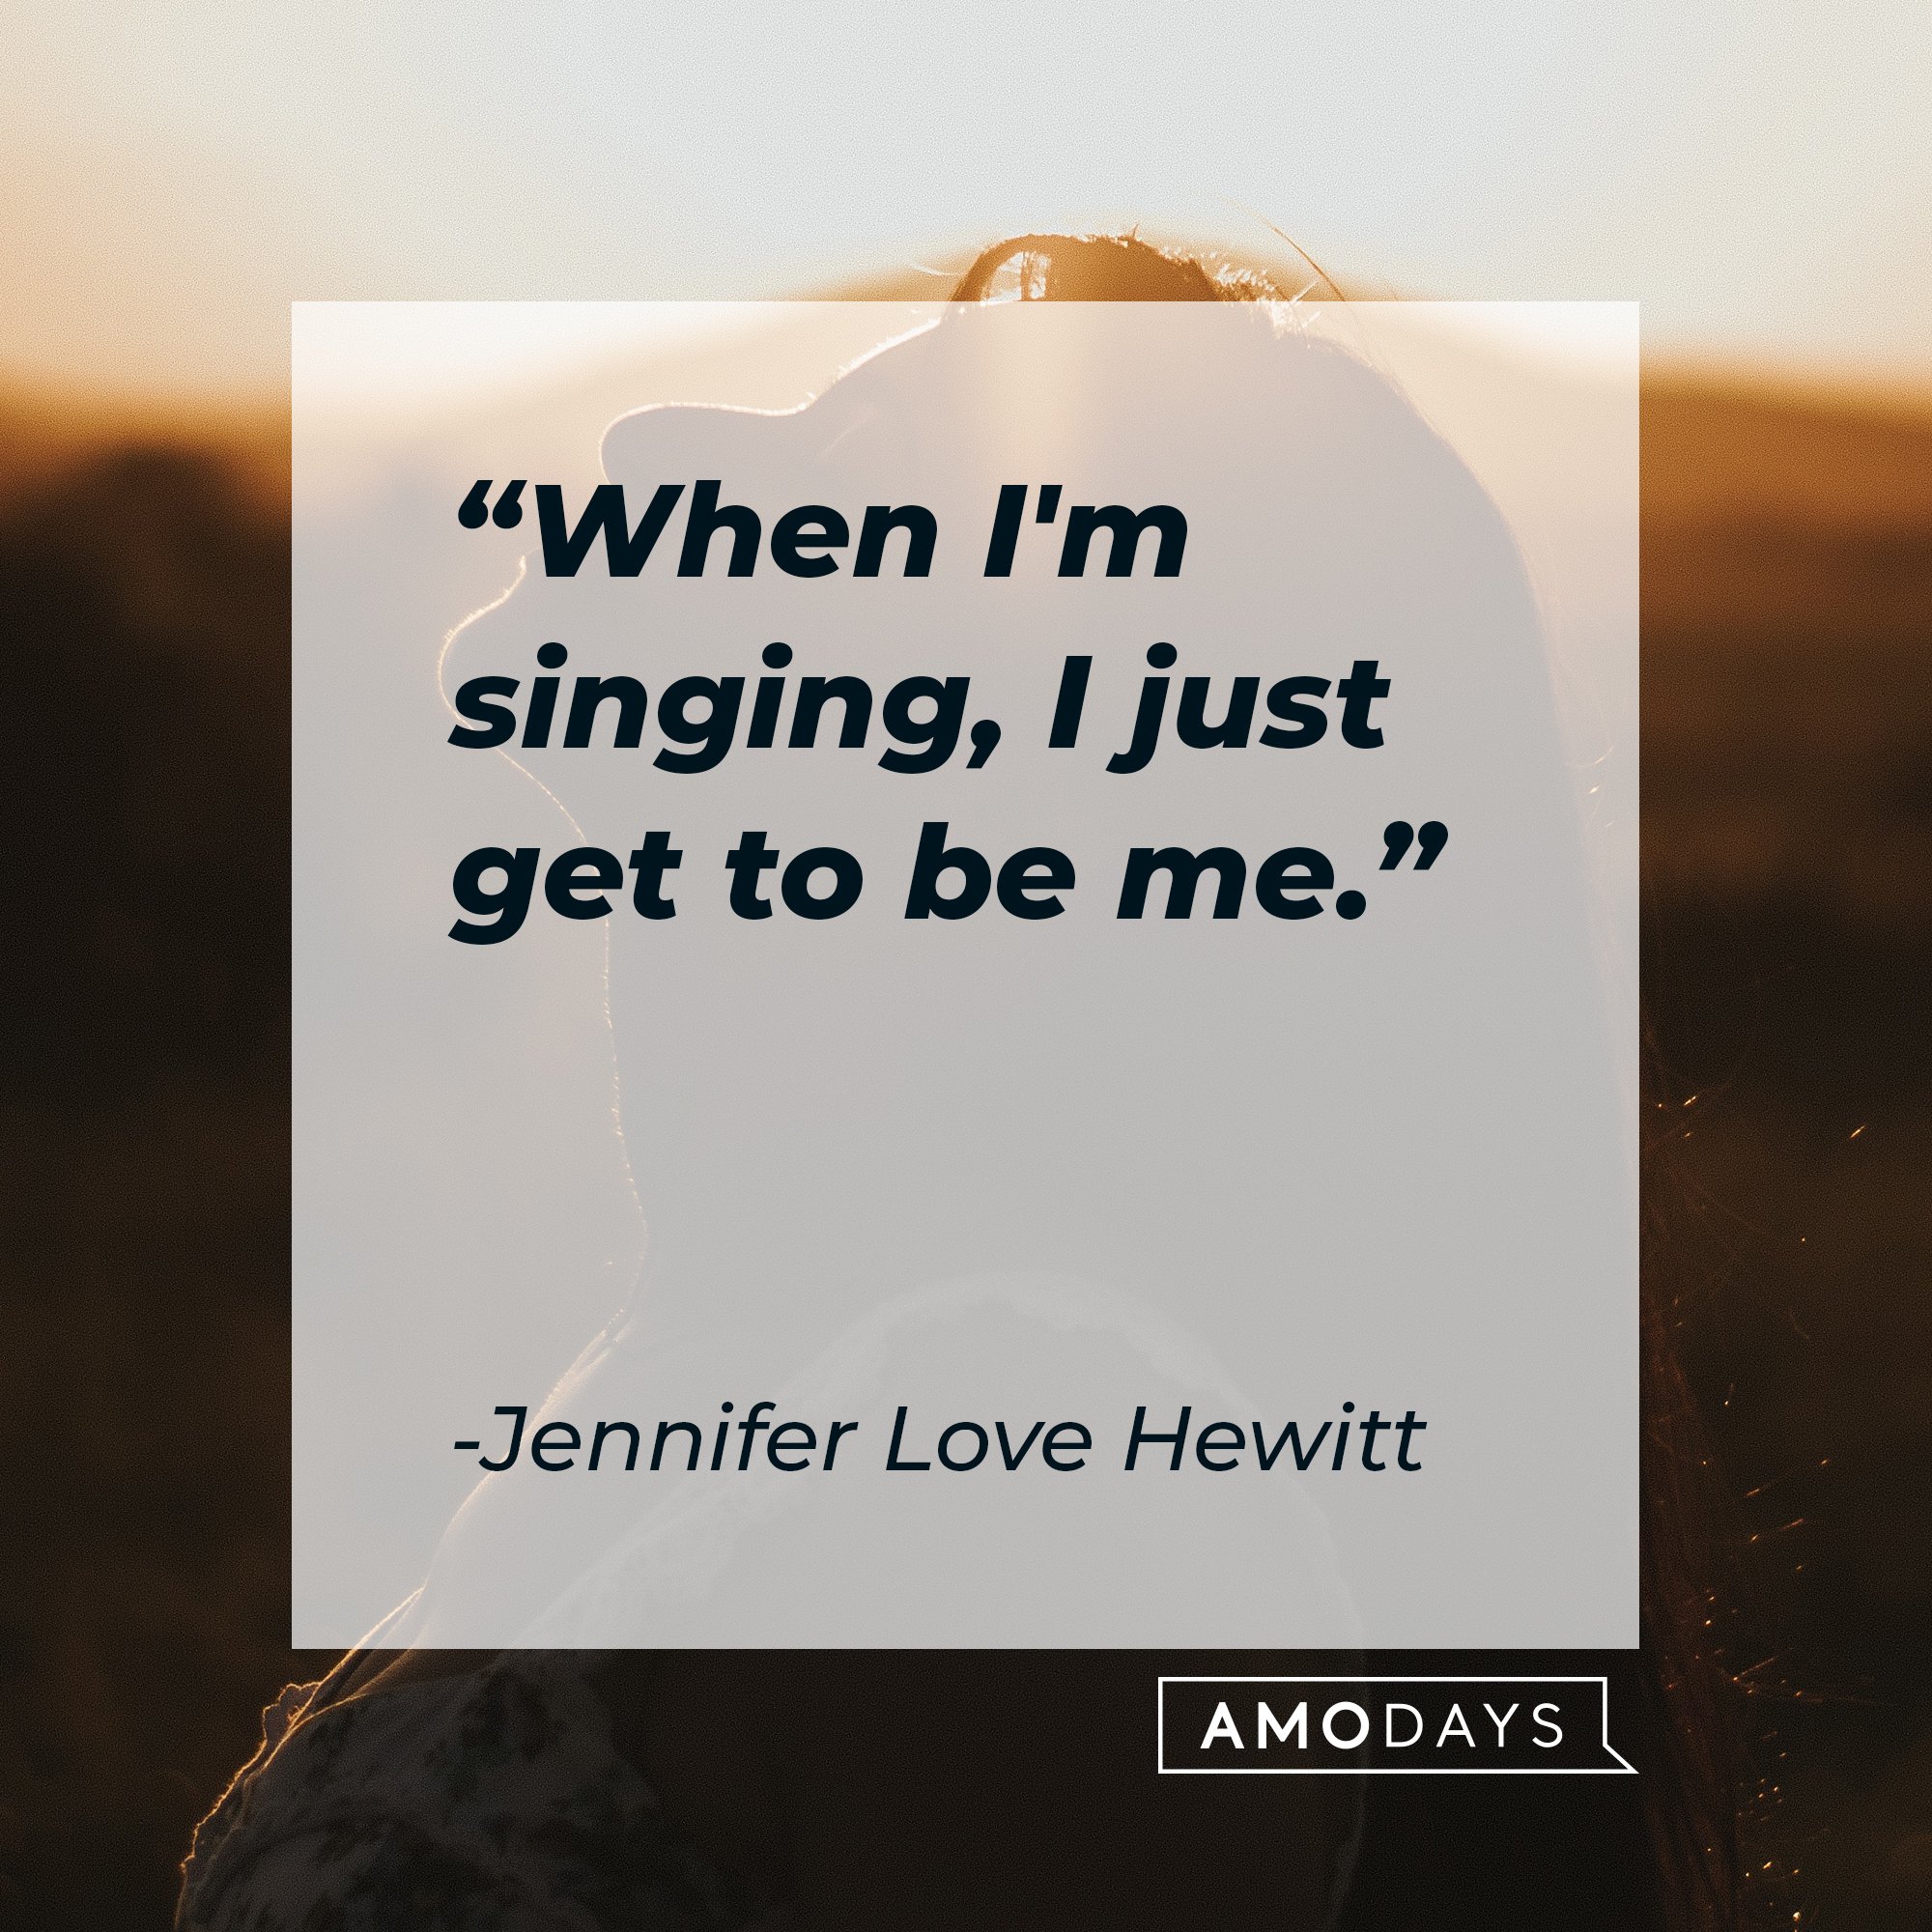 Jennifer Love Hewitt’s quote: "When I'm singing, I just get to be me." | Image: AmoDays